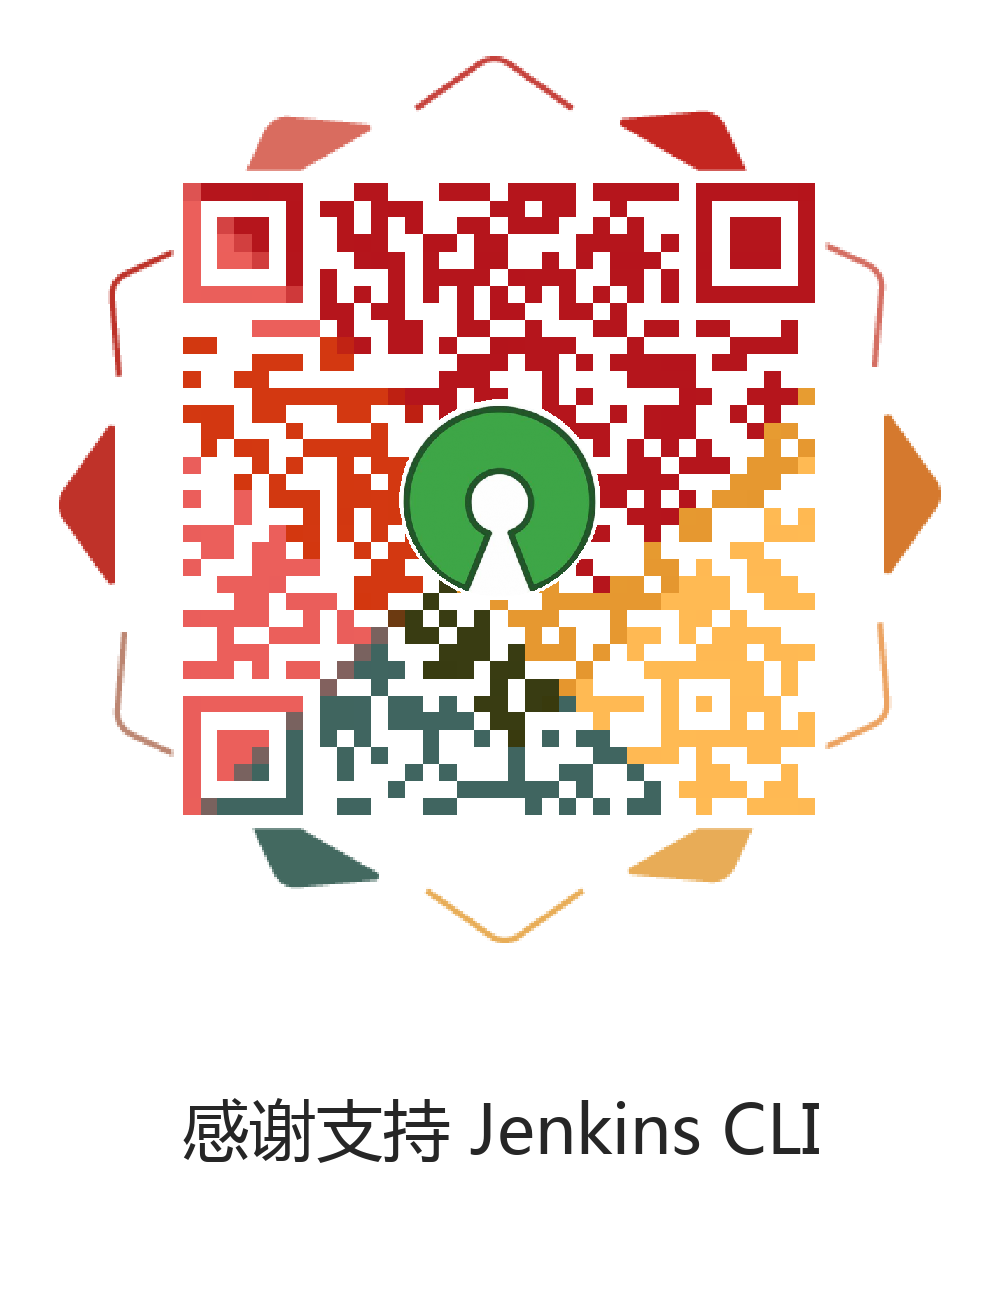 wechat/articles/2019/11/2019-11-20-jenkins-cli-help-you-manage-jenkins/qr-code-for-vote.png